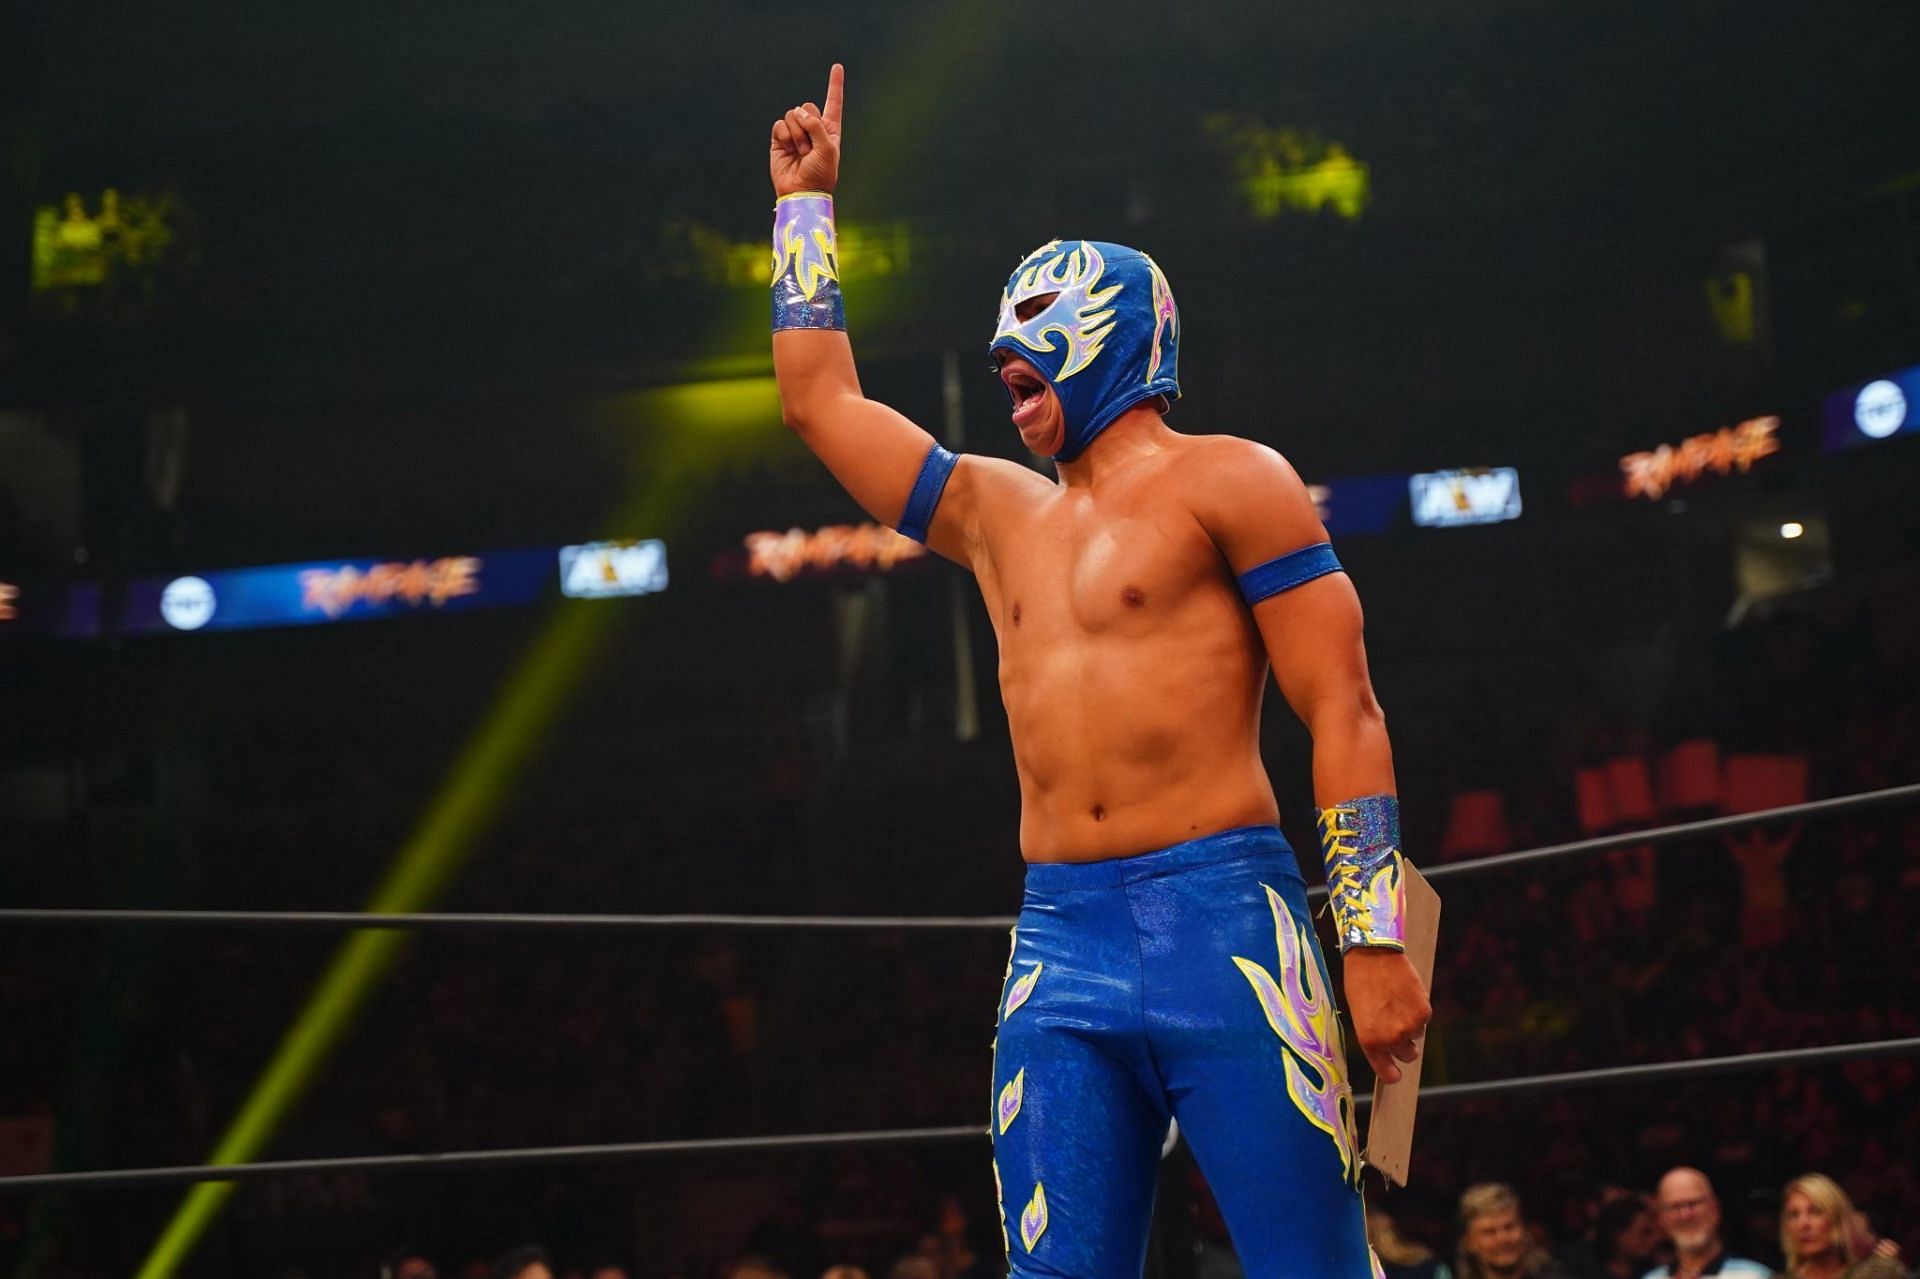 Fuego Del Sol broke his silence on Twitter.